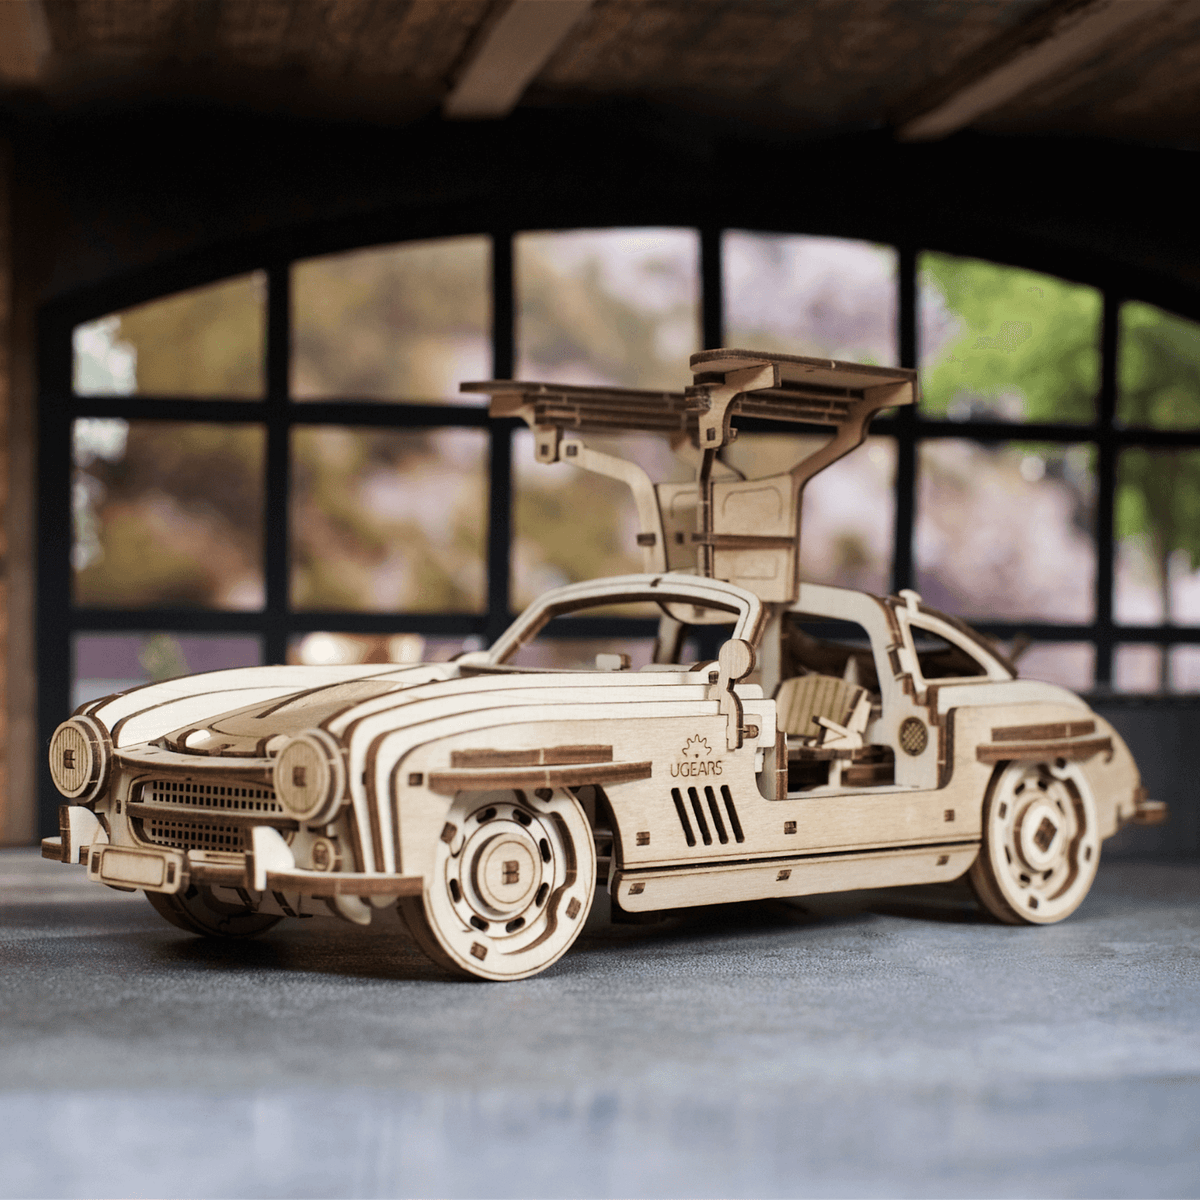 Gullwing doors sports coupe mechanical wooden puzzle Ugears--